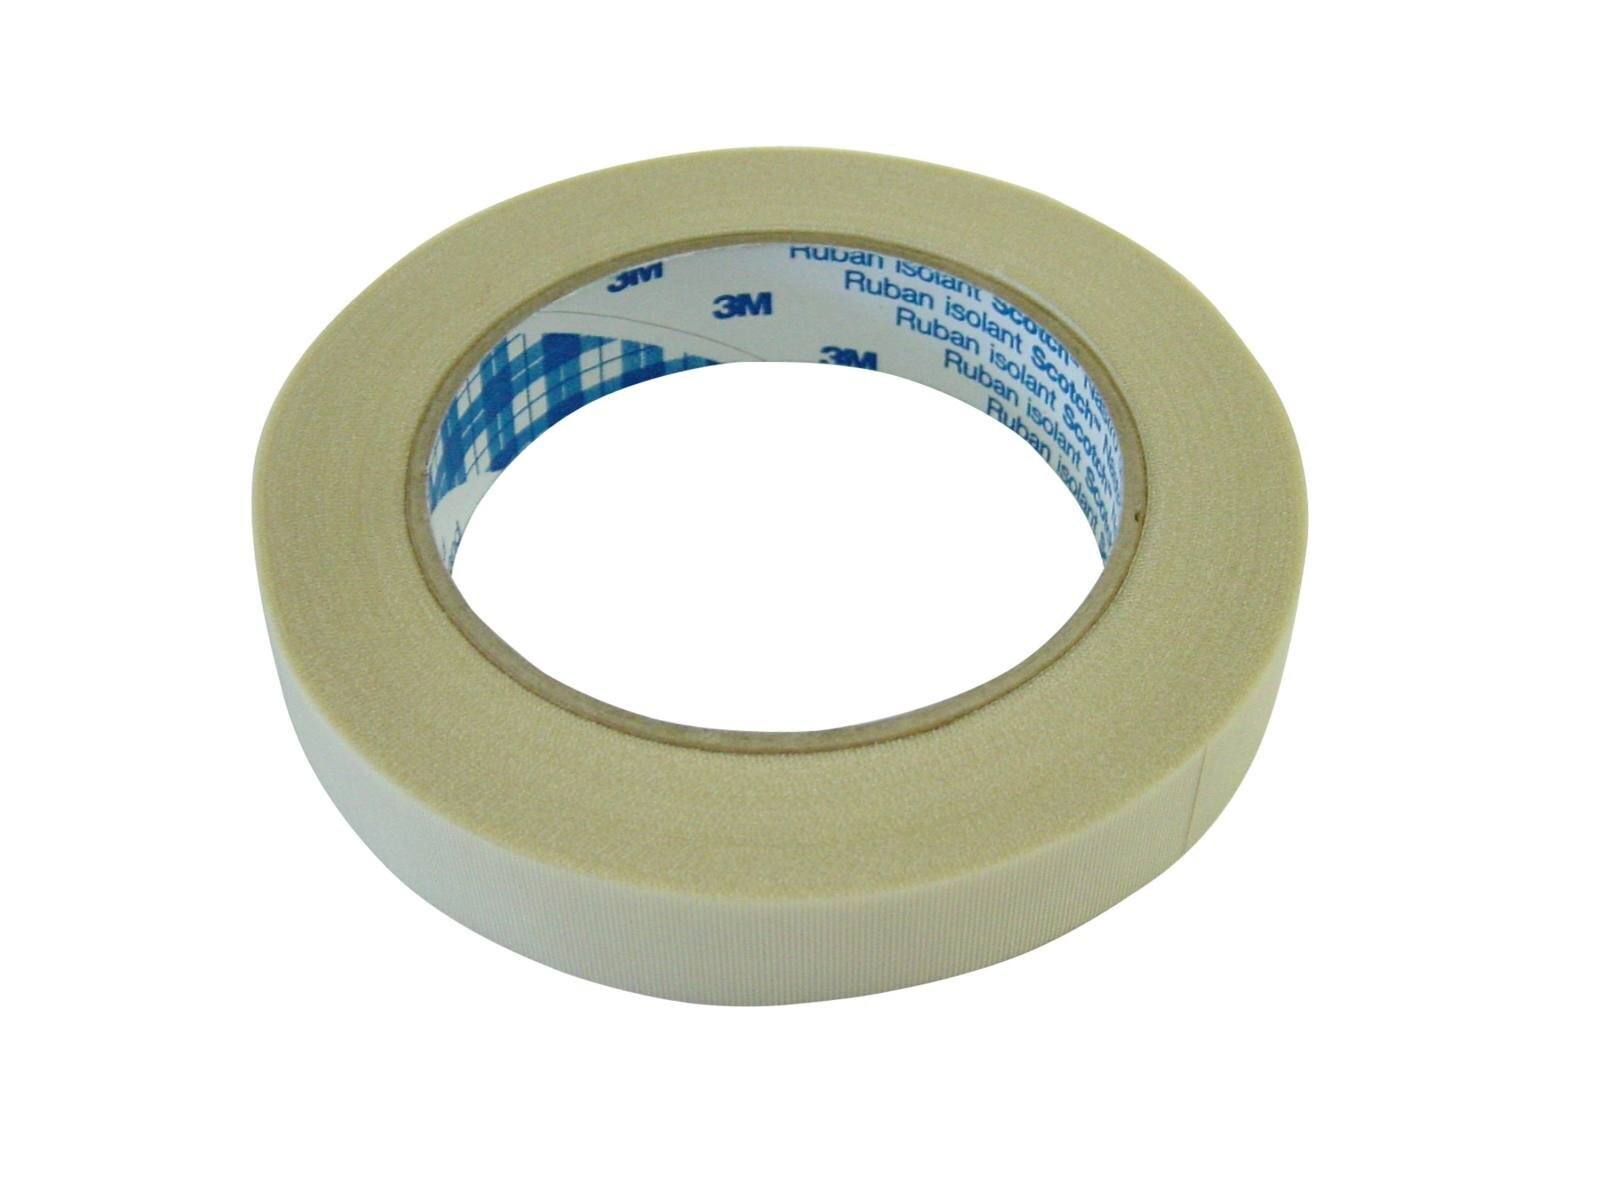 3M ET 69 Glasweefselband, wit, 15 mm x 33 m x 0,18 mm